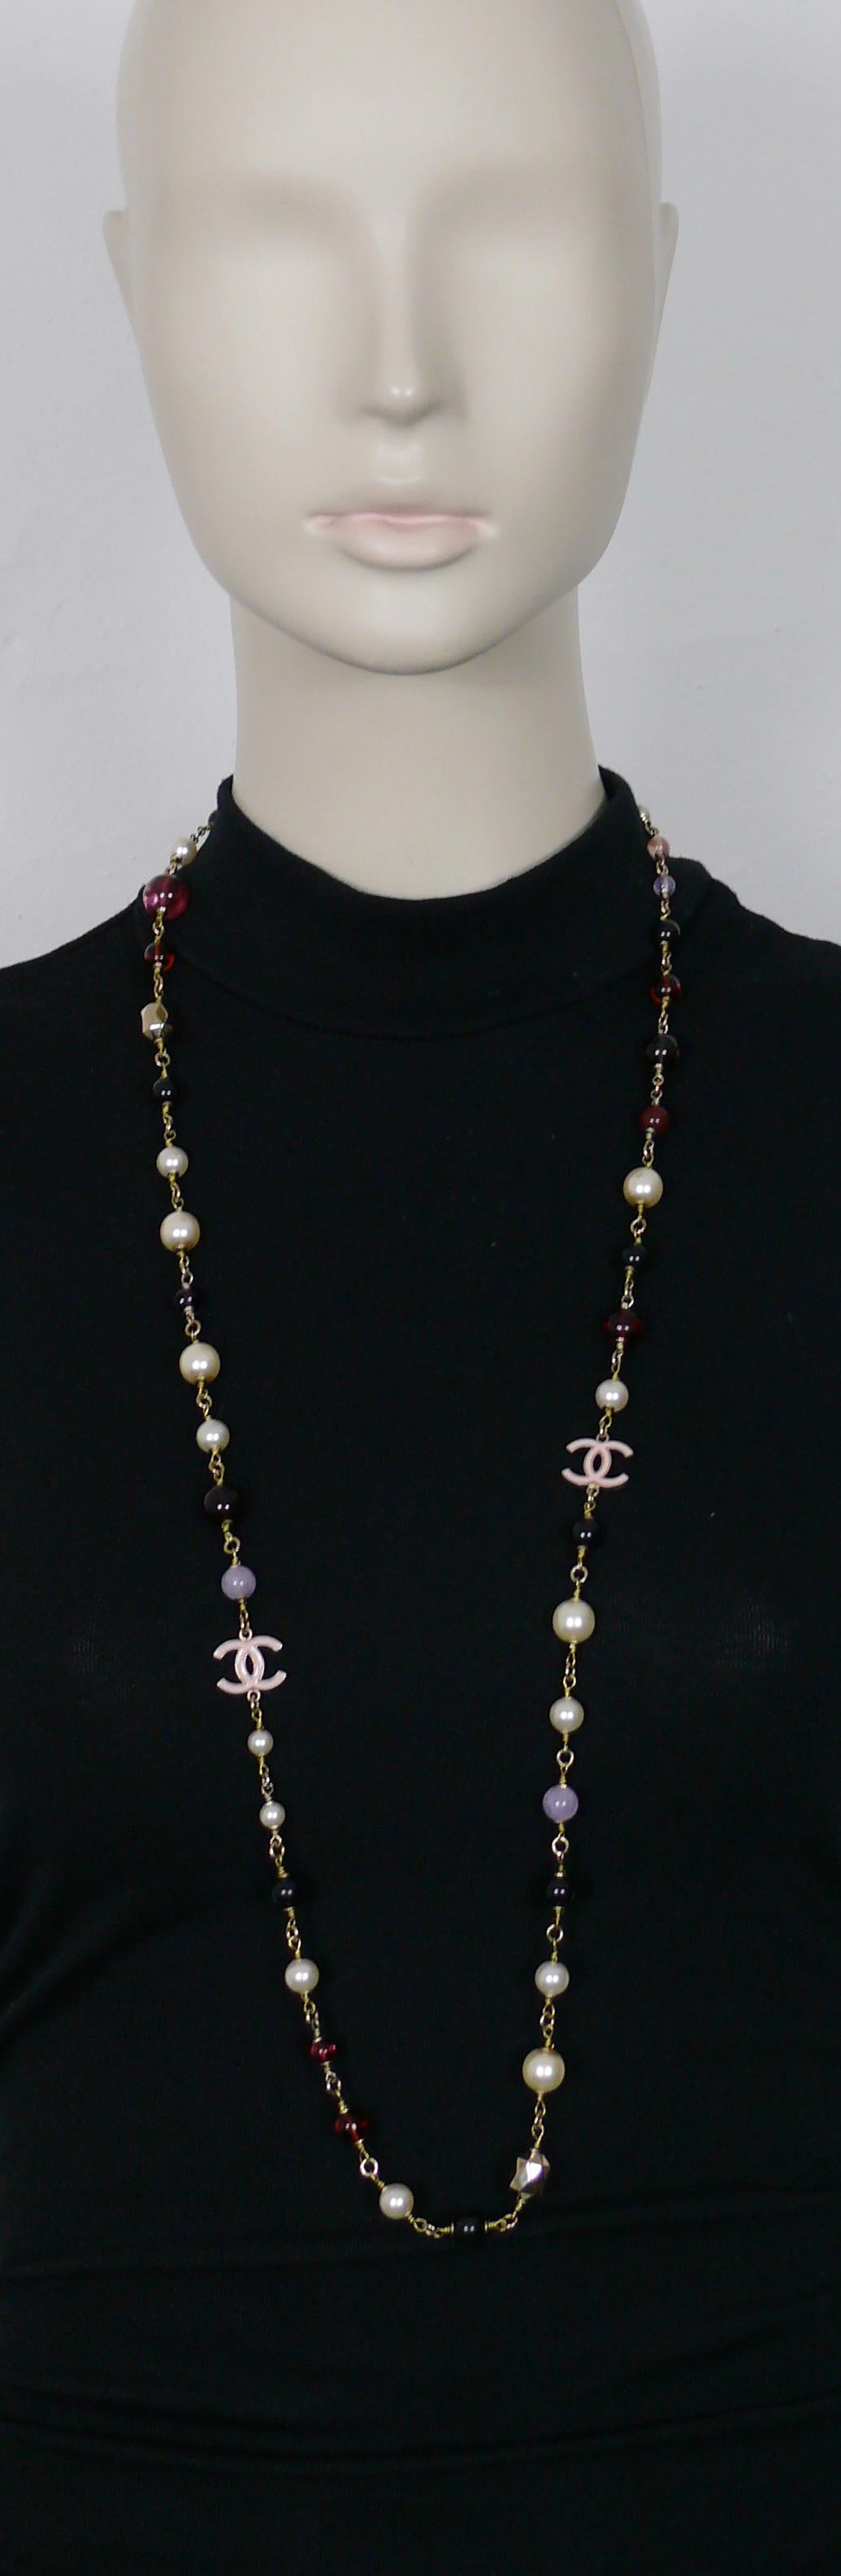 CHANEL pale gold toned necklace featuring multicolored glass beads, gold toned faceted beads, black resin beads, faux pearls and two baby pink enamel CC logos.

Lobster clasp closure.

Laser engraving CHANEL B17 B MADE IN ITALY.

Indicative